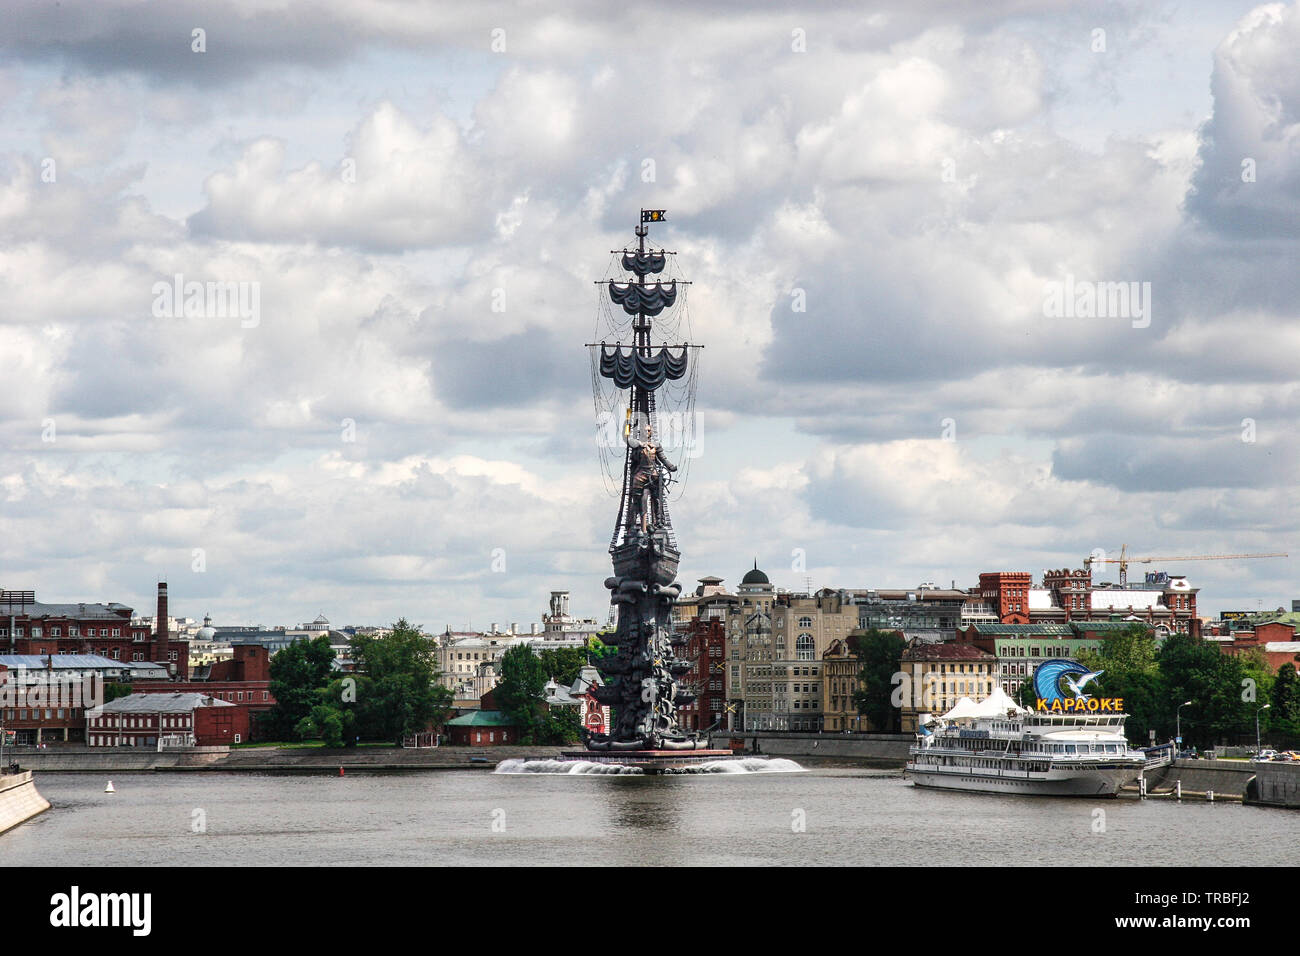 Peter The Great Statue designed by Zuba Tsereteli in 1997 and located on the Krymskaya Embankment of the Moscow River in Moscow, Russian Federation Stock Photo